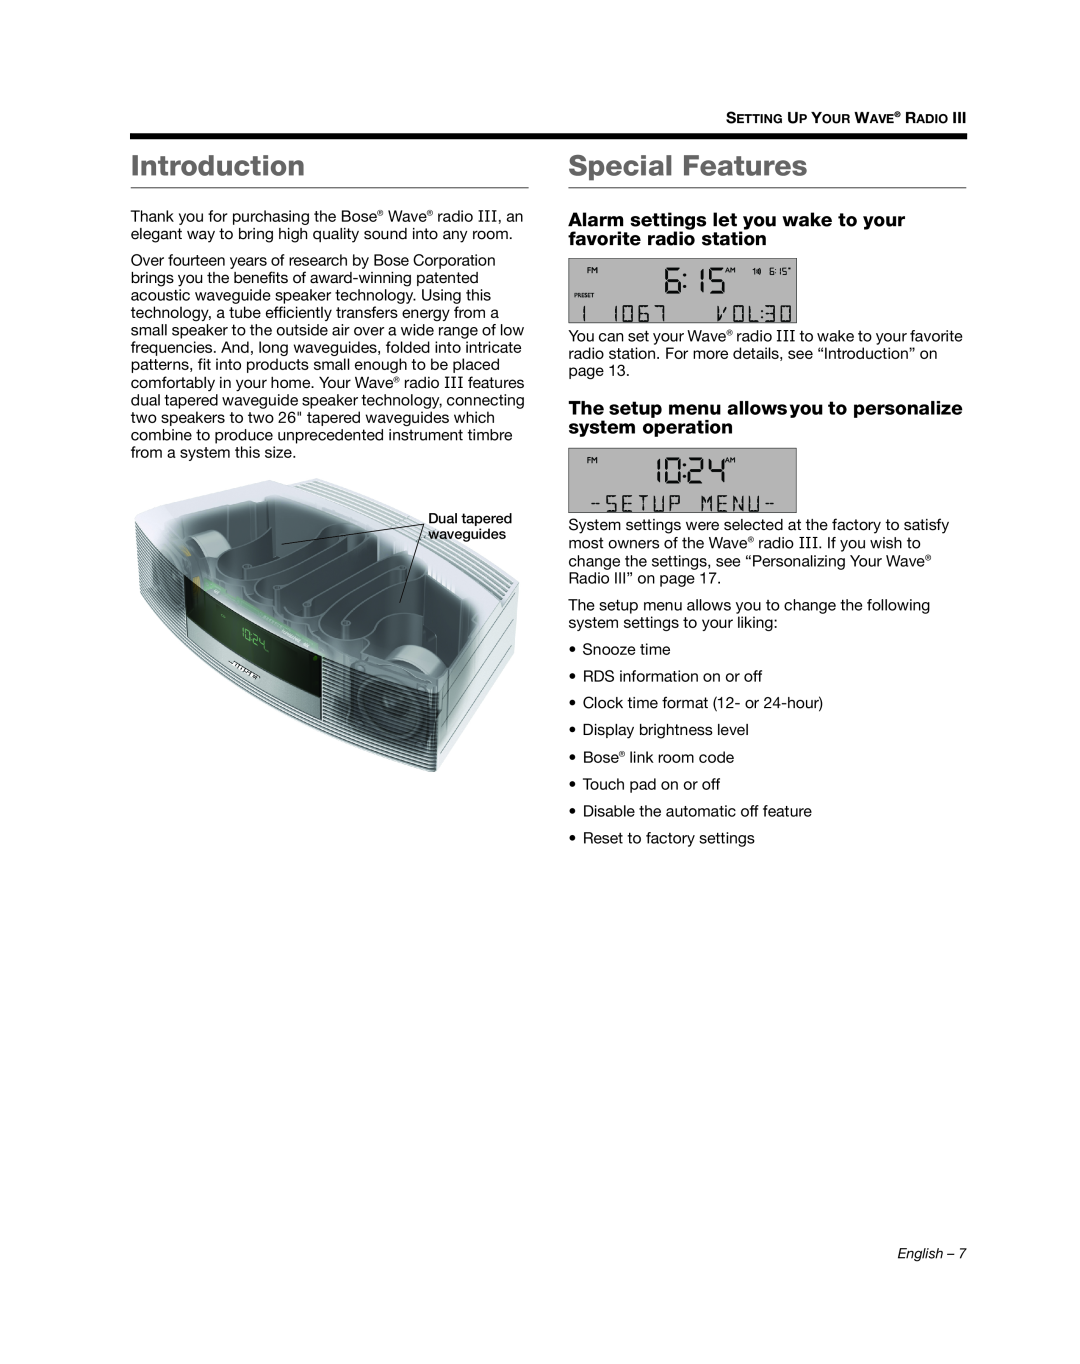 Bose III manual Introduction, Special Features 